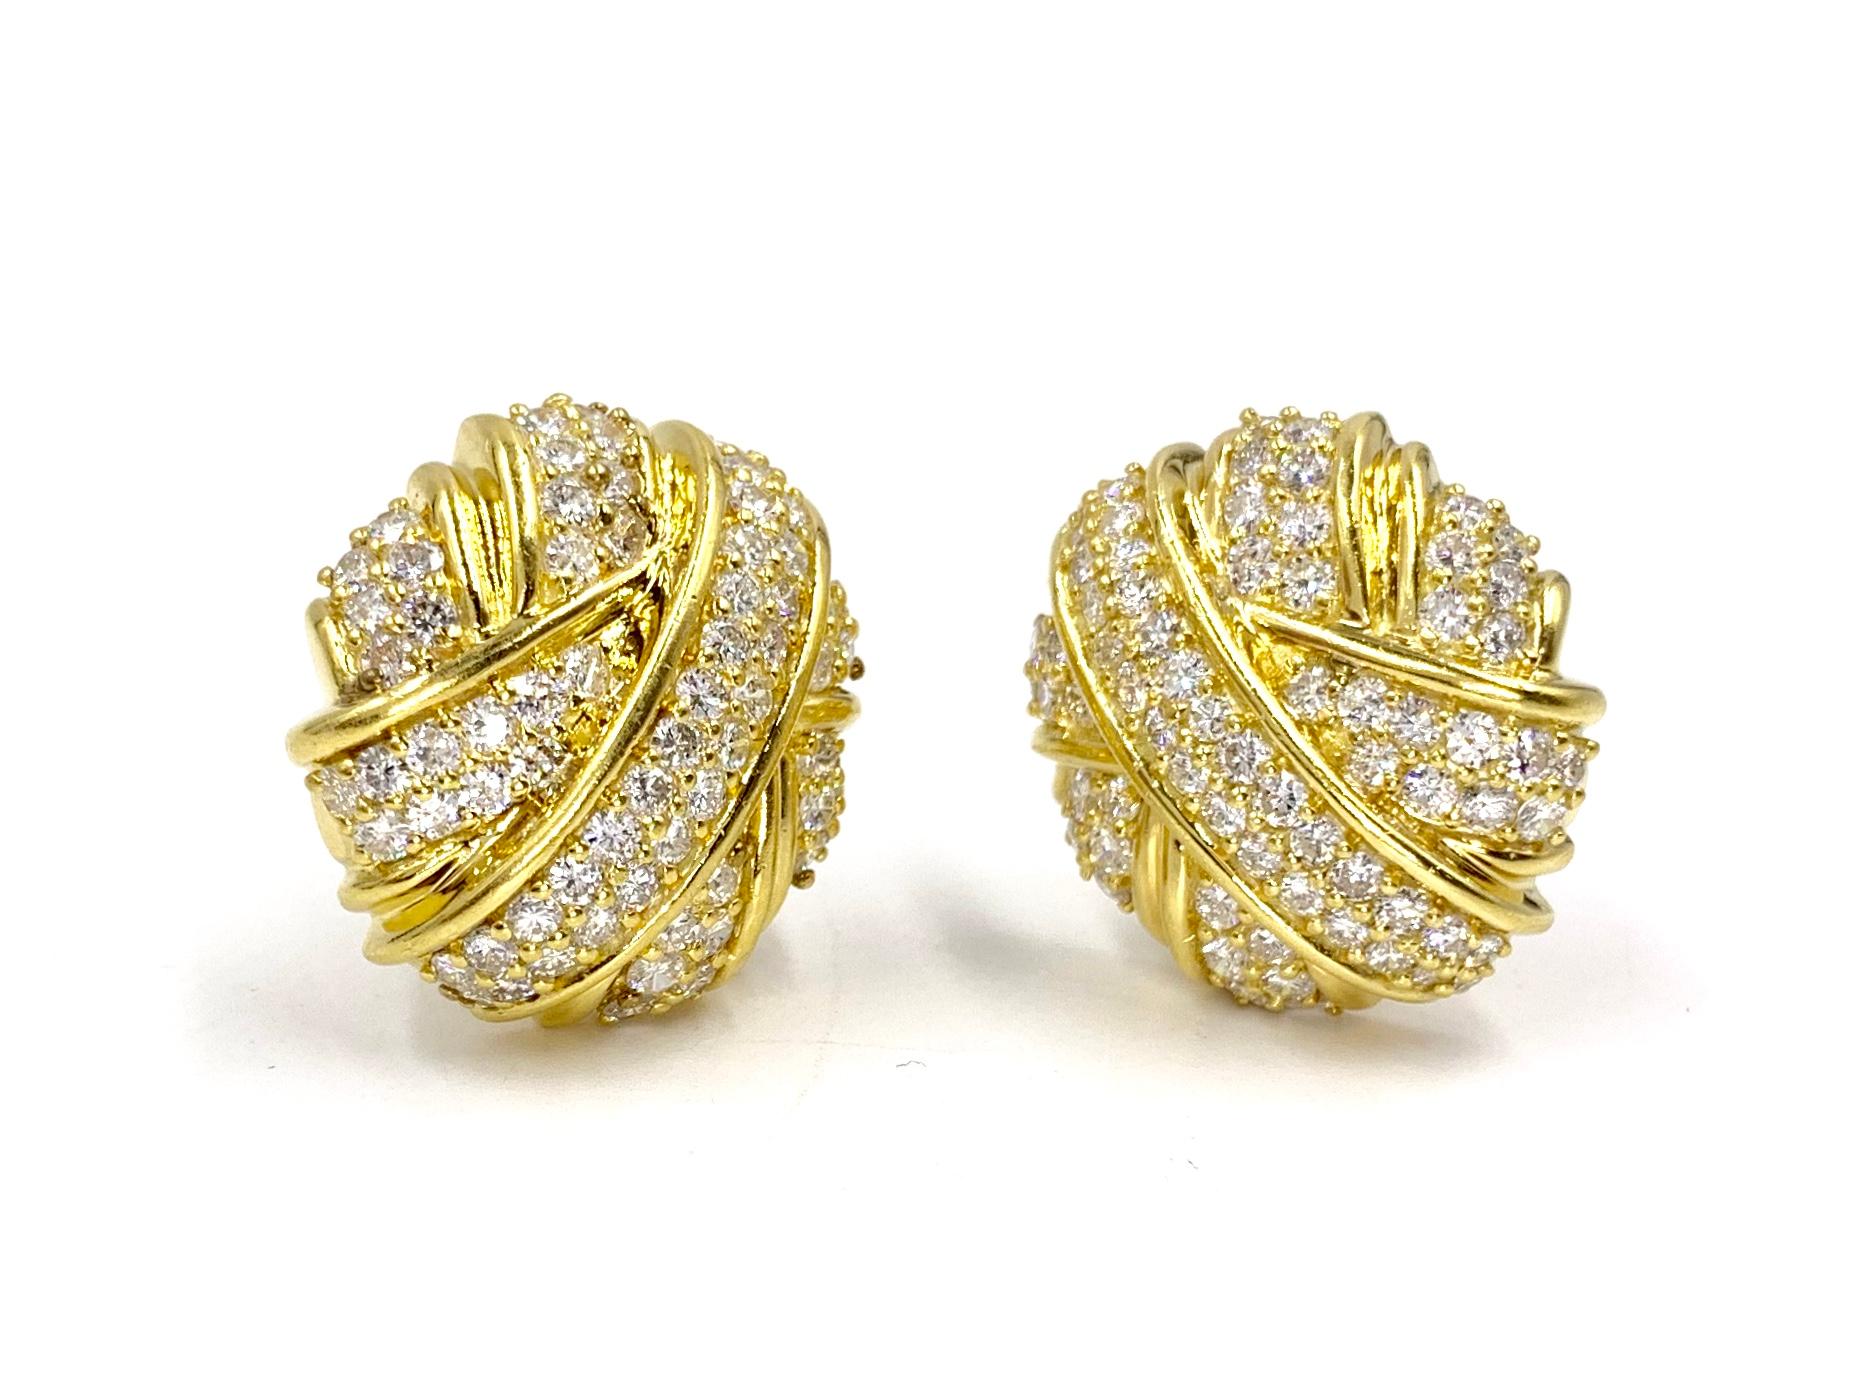 Simply exquisite slightly oval shaped button clip-on earrings featuring 4.65 carats of high quality round brilliant diamonds at approximately F color, VS2 clarity. Earrings feature a stylish overlay pattern with two rows of diamonds in each section